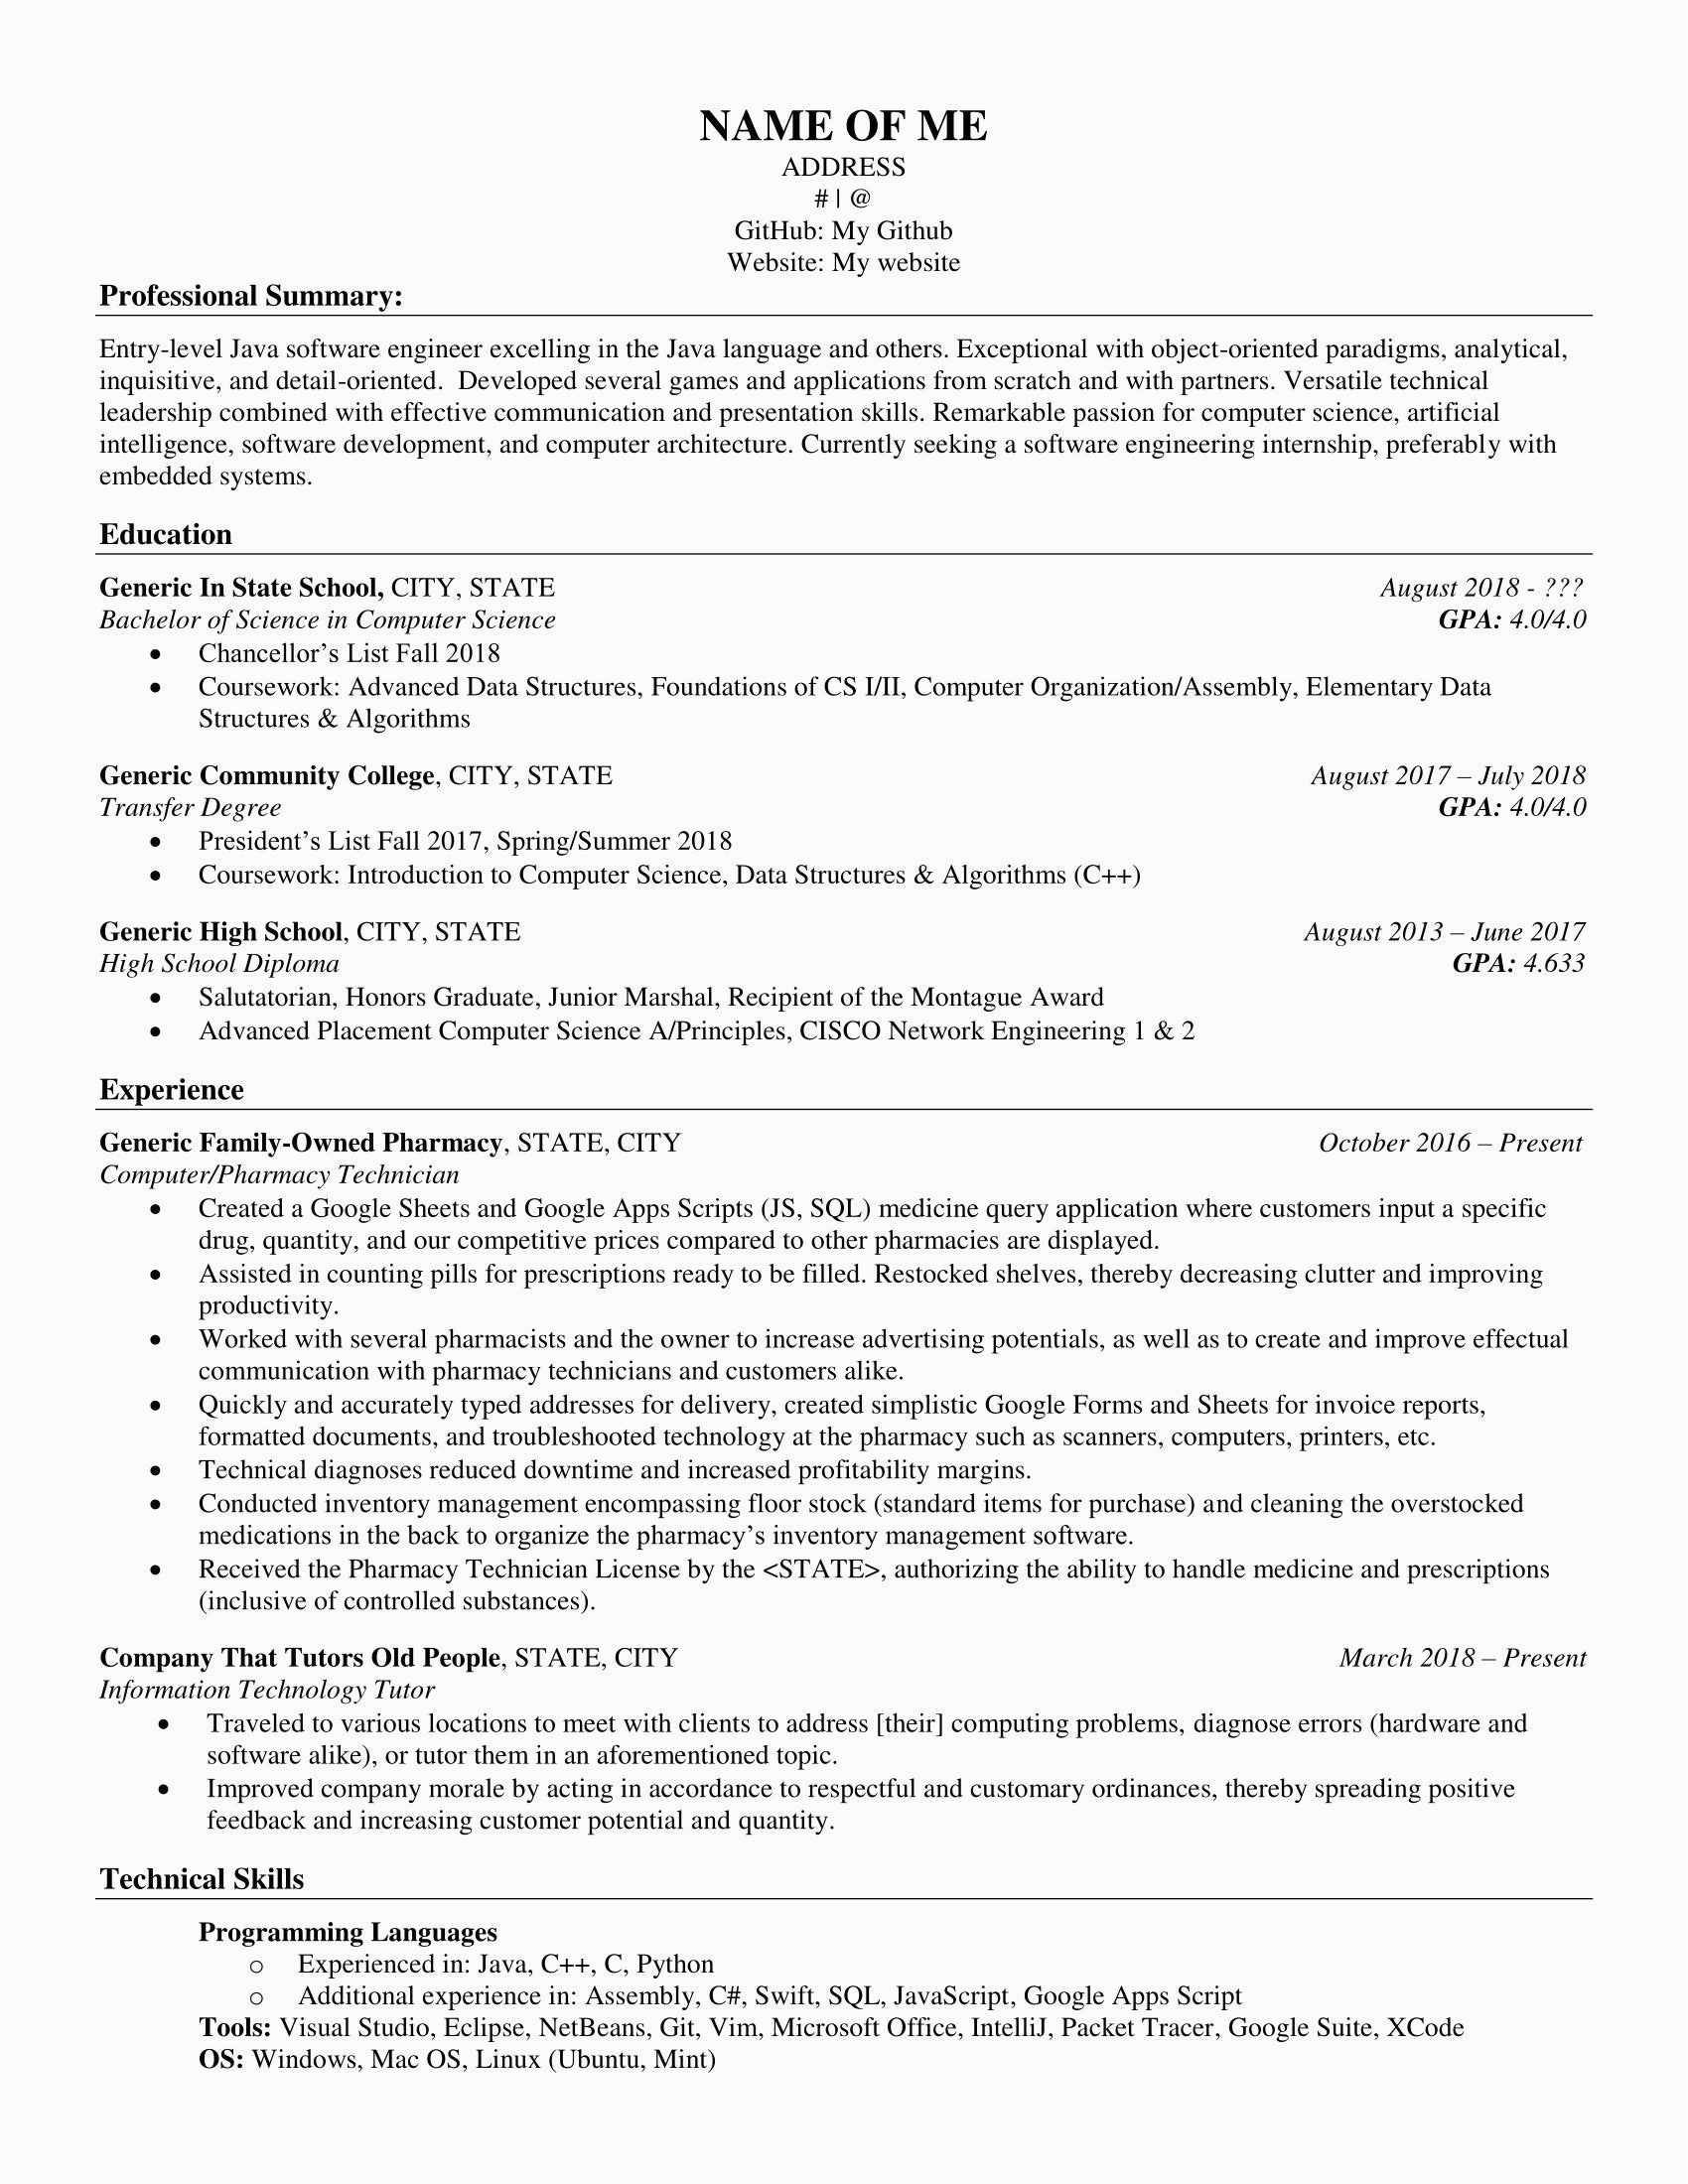 Sample Resume for College Cs Student sophomore Puter Science Student S Resume R Resumes